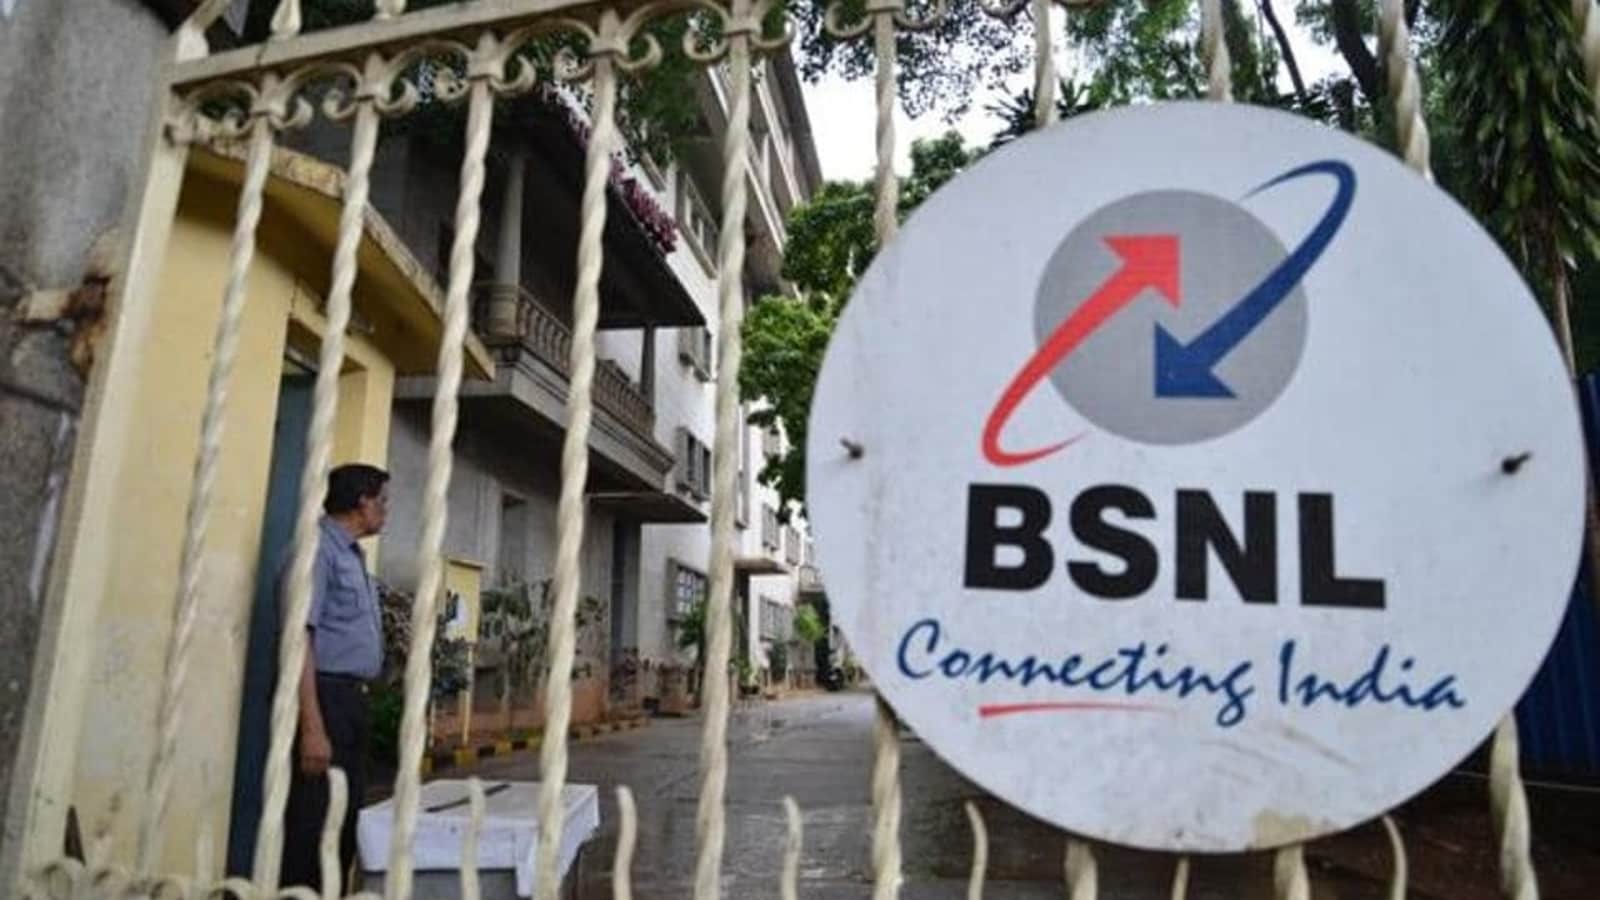 BSNL JTO recruitment notice for 11,705 posts is FAKE: Official confirmation